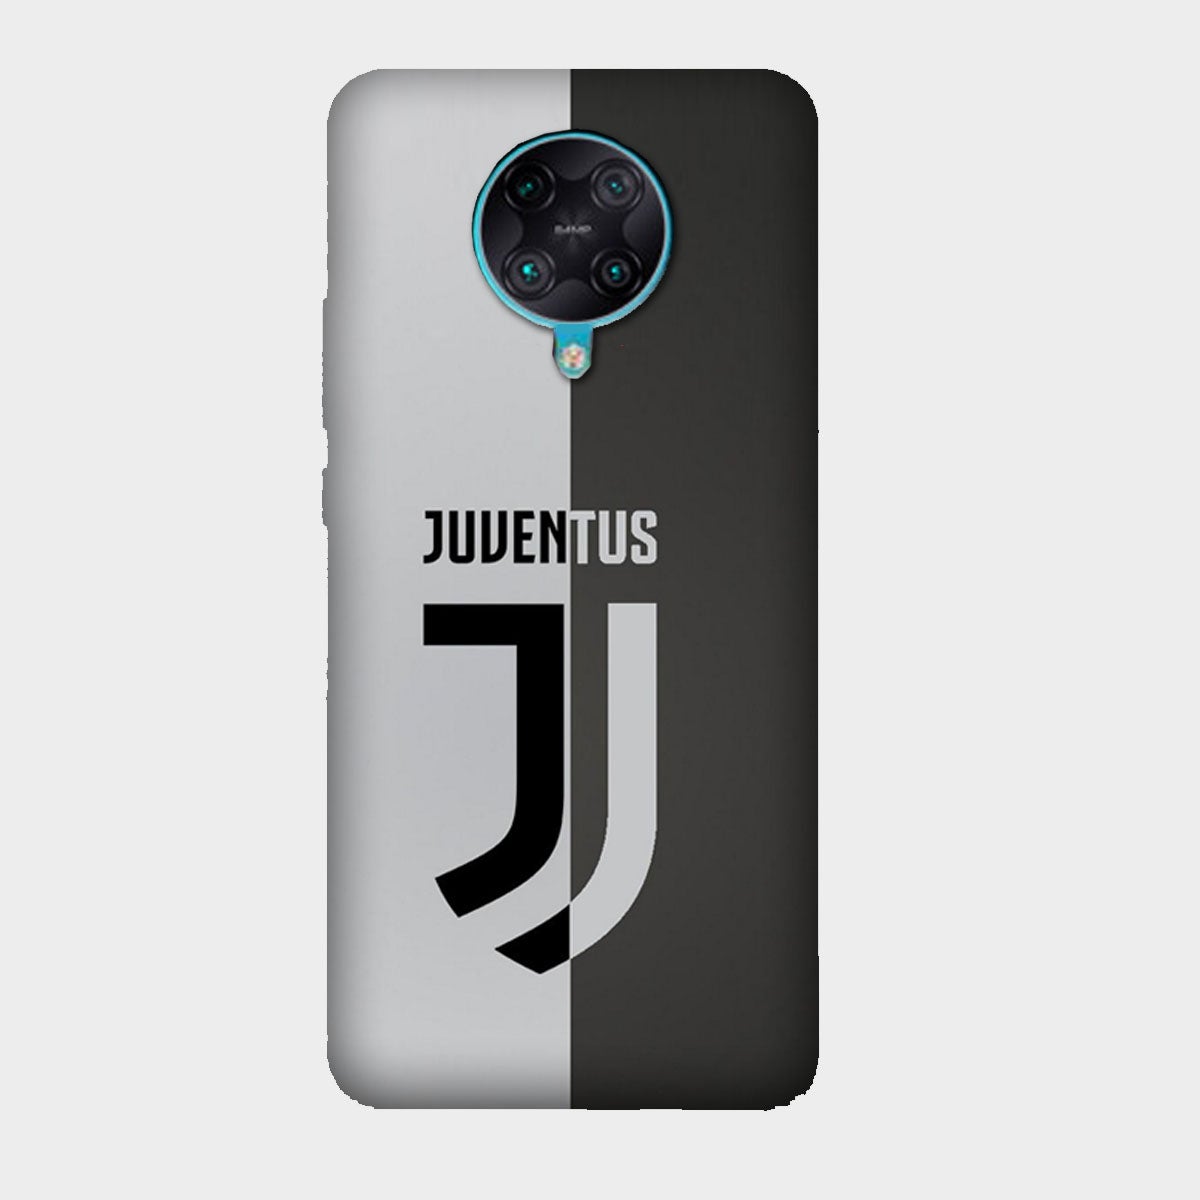 Juventus FC - Mobile Phone Cover - Hard Case